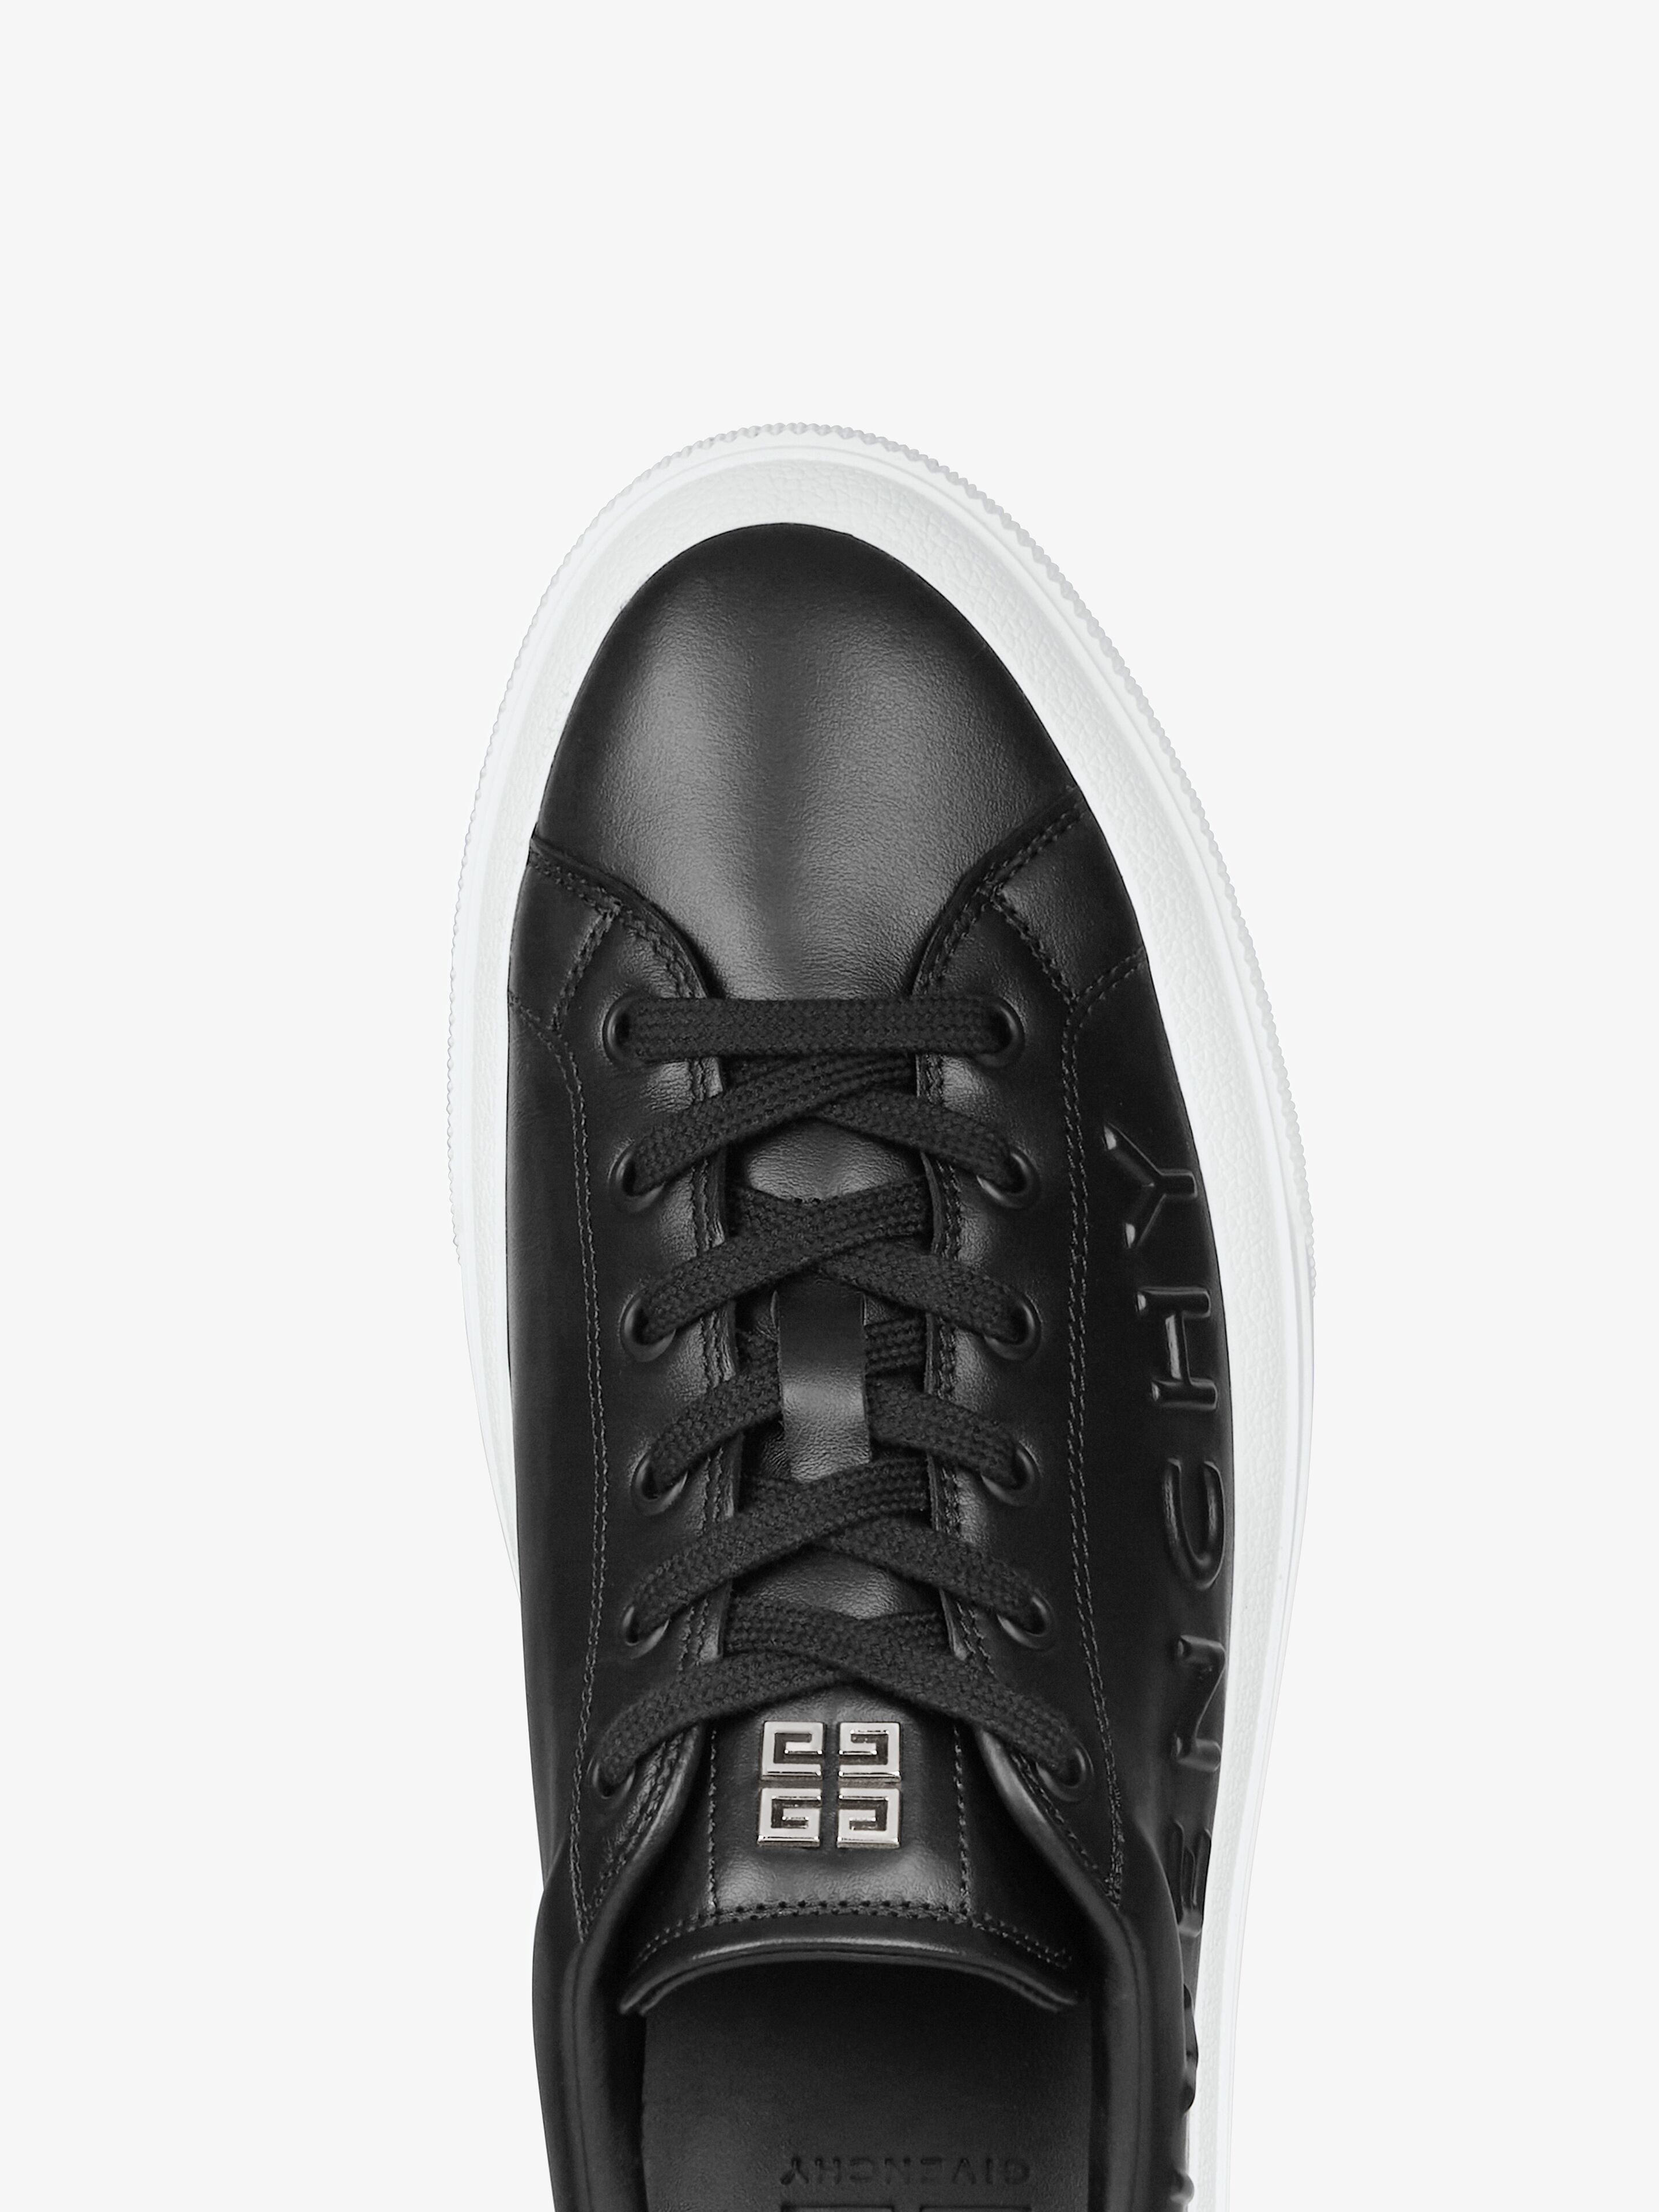 CITY SPORT SNEAKERS IN GIVENCHY LEATHER - 7